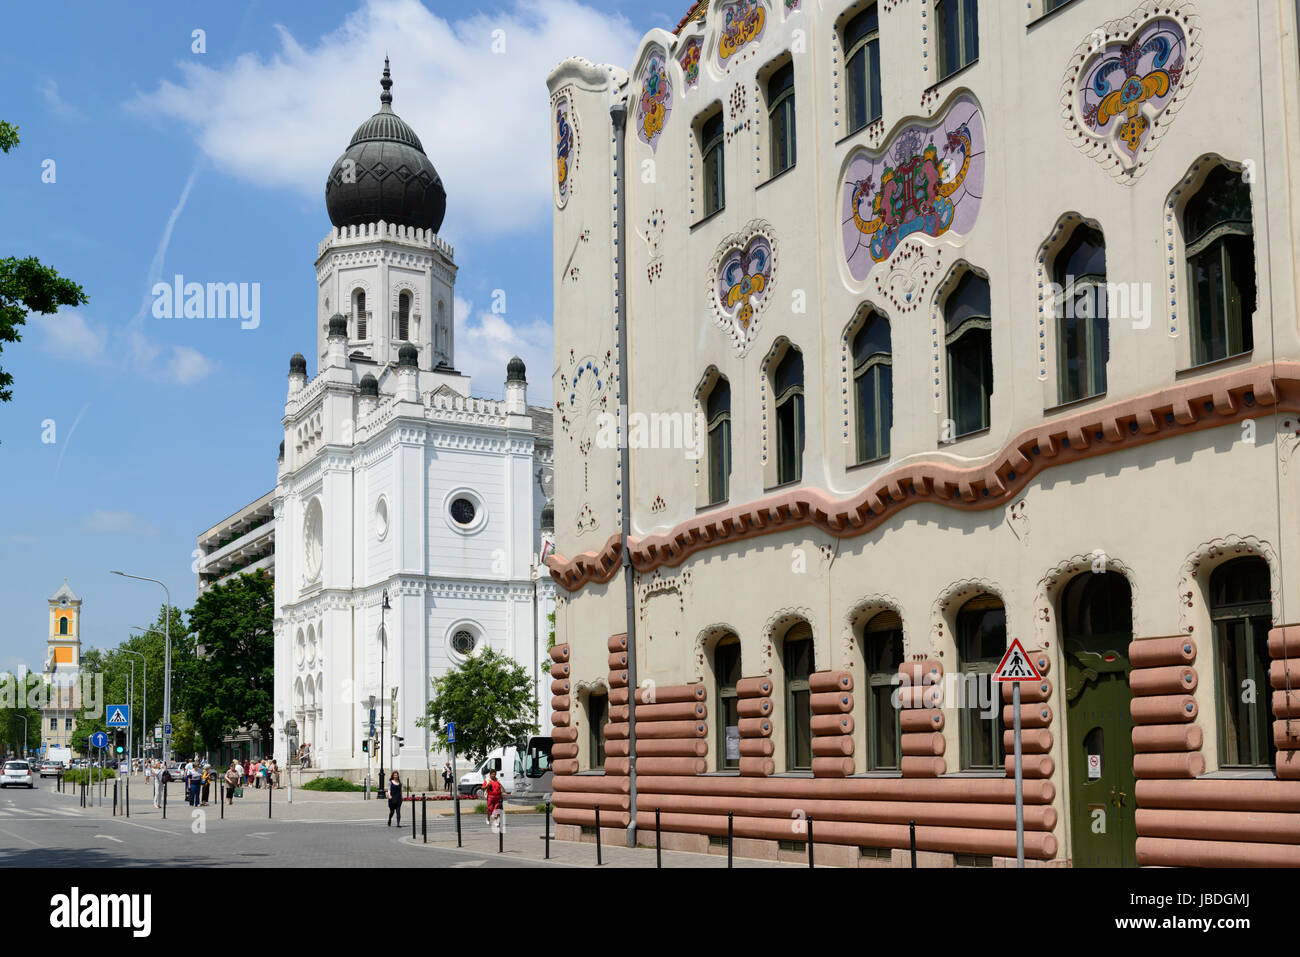 Hungary, Kecskemet. The Cifra Palota and Old Synagogue. Stock Photo